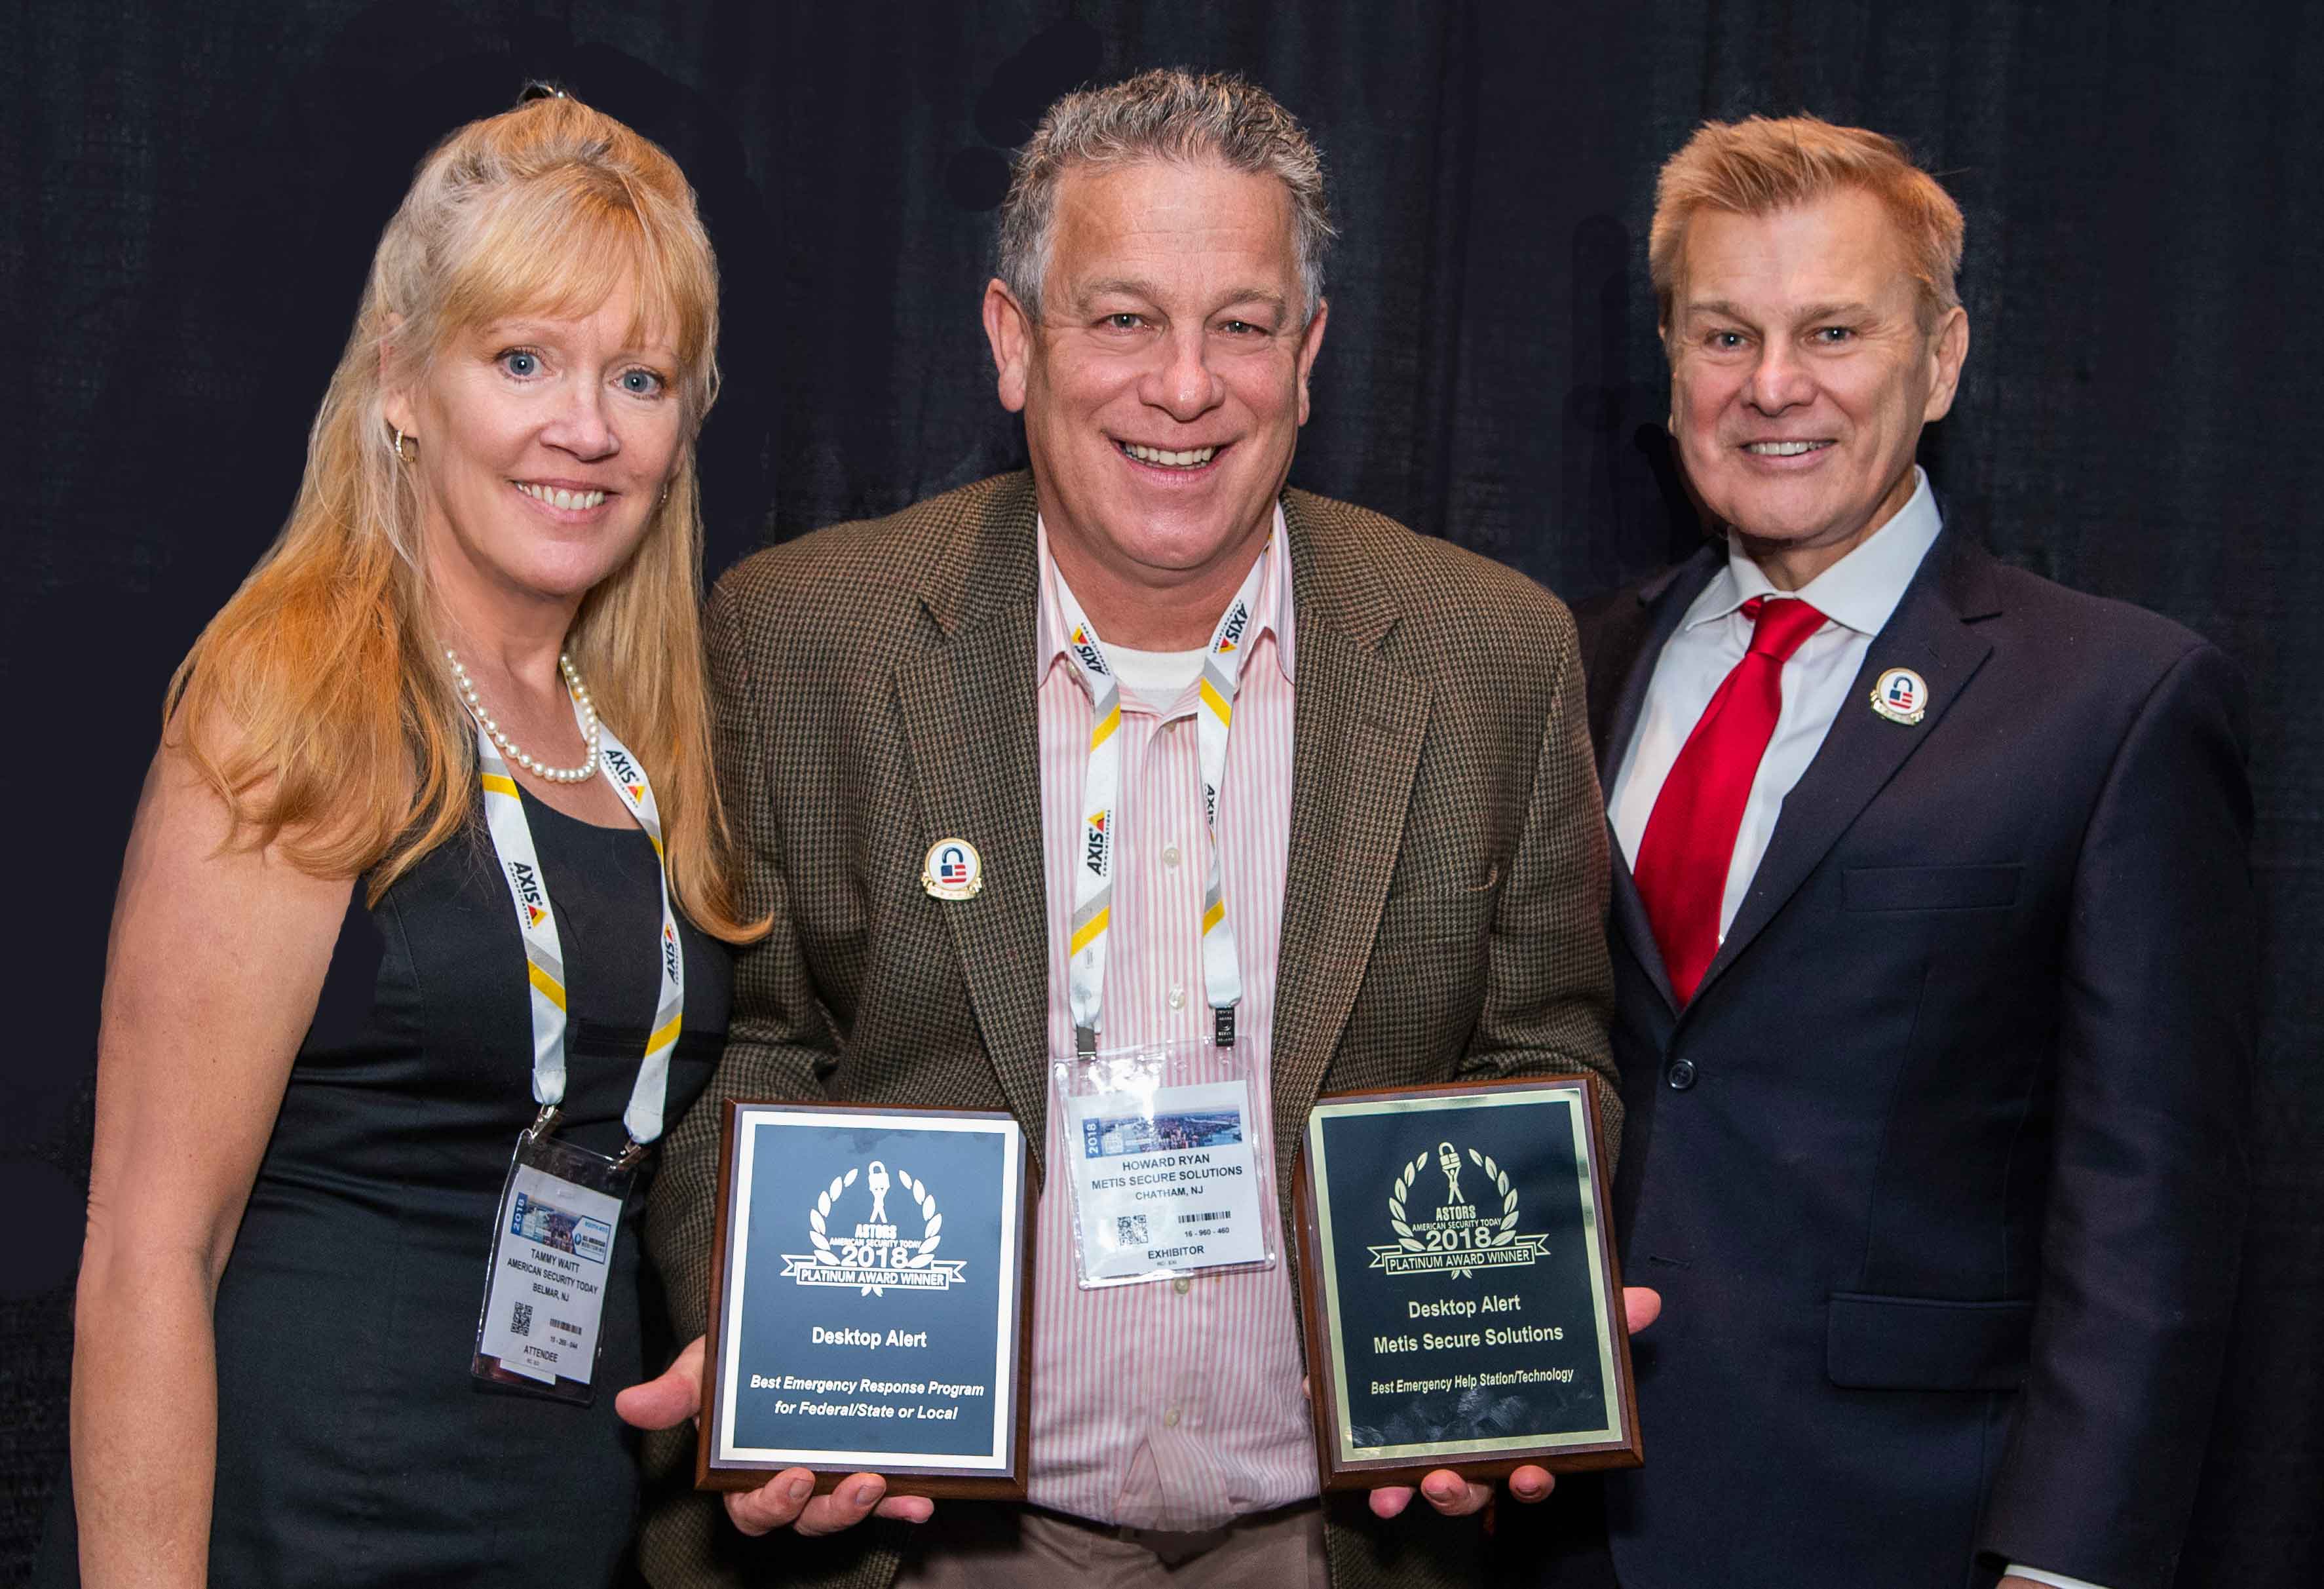 Howard Ryan, Founder & CEO of Desktop Alert, and Owner of Metis Secure Solutions, accepting two 2018 ‘ASTORS’ Awards for their industry-leading ‘Less Than One Minute’ network-centric emergency mass notification solutions.